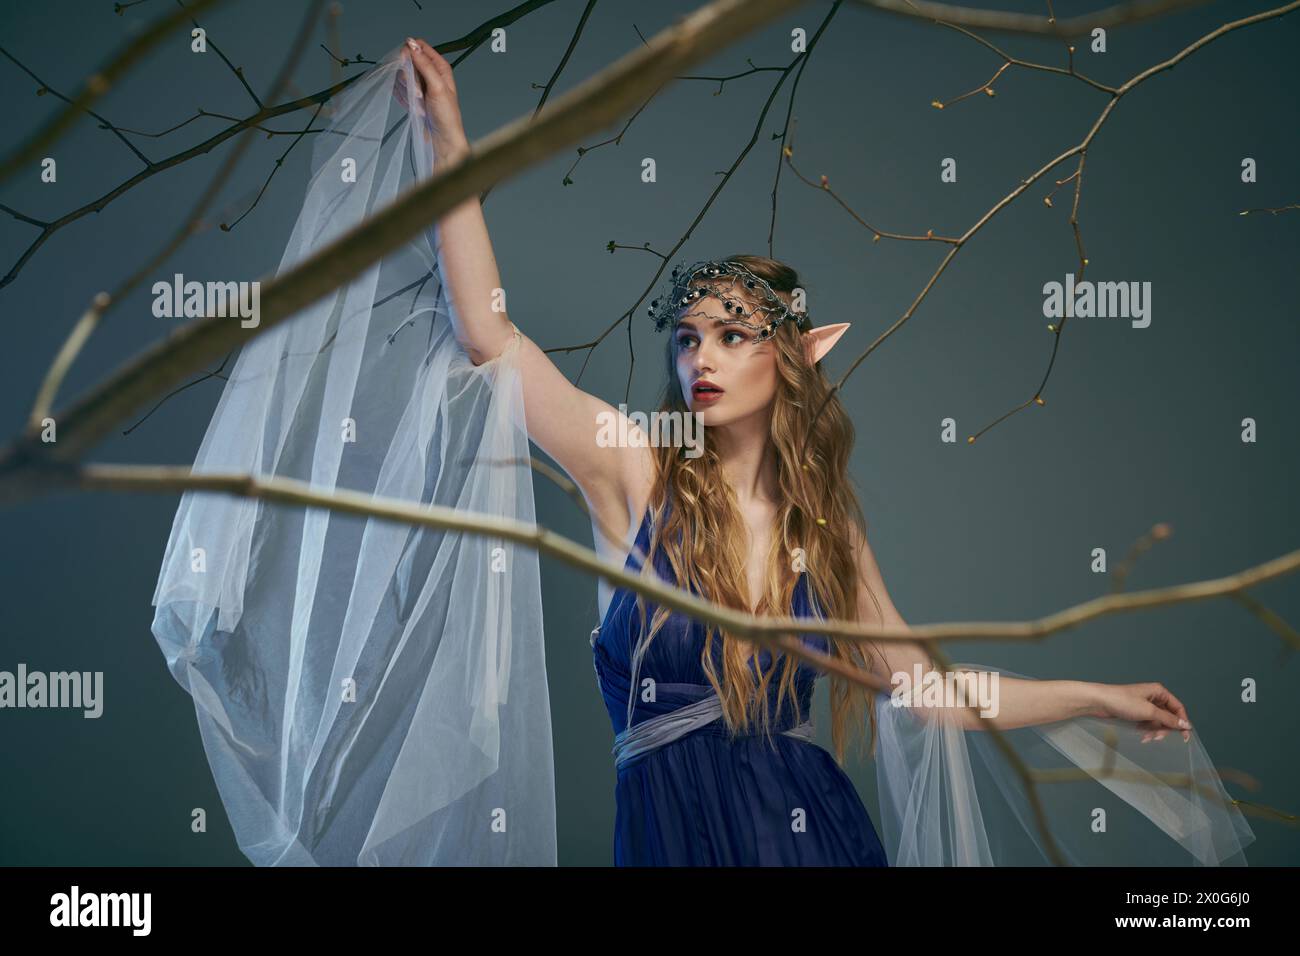 A young woman in a blue dress gracefully holds a delicate white veil in a magical studio setting fit for an elf princess. Stock Photo